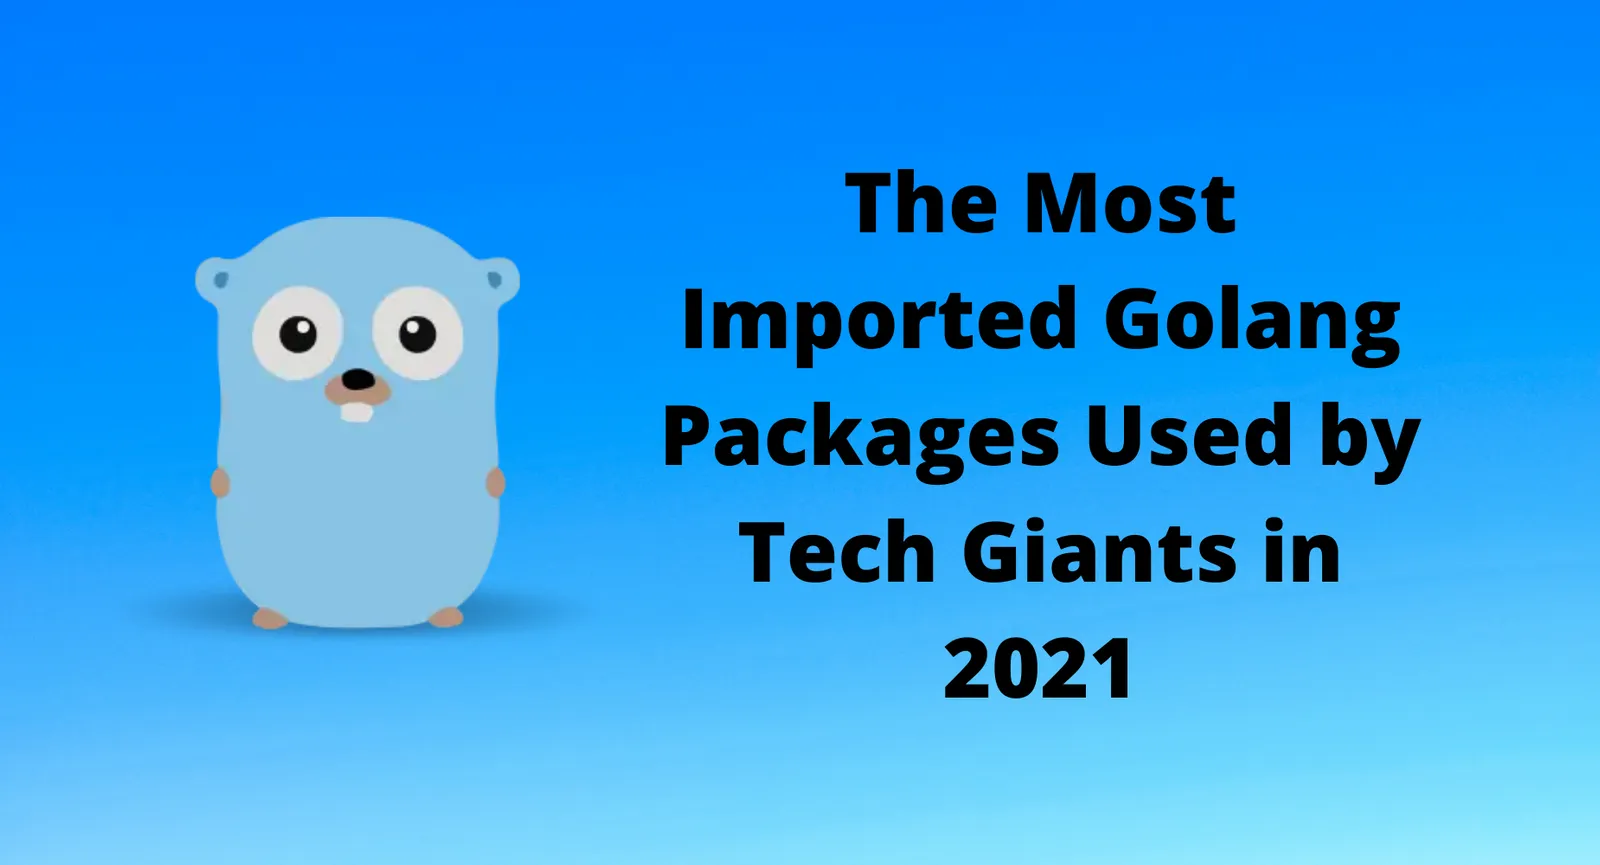 The Most Imported Golang Packages Used by Tech Giants in 2021